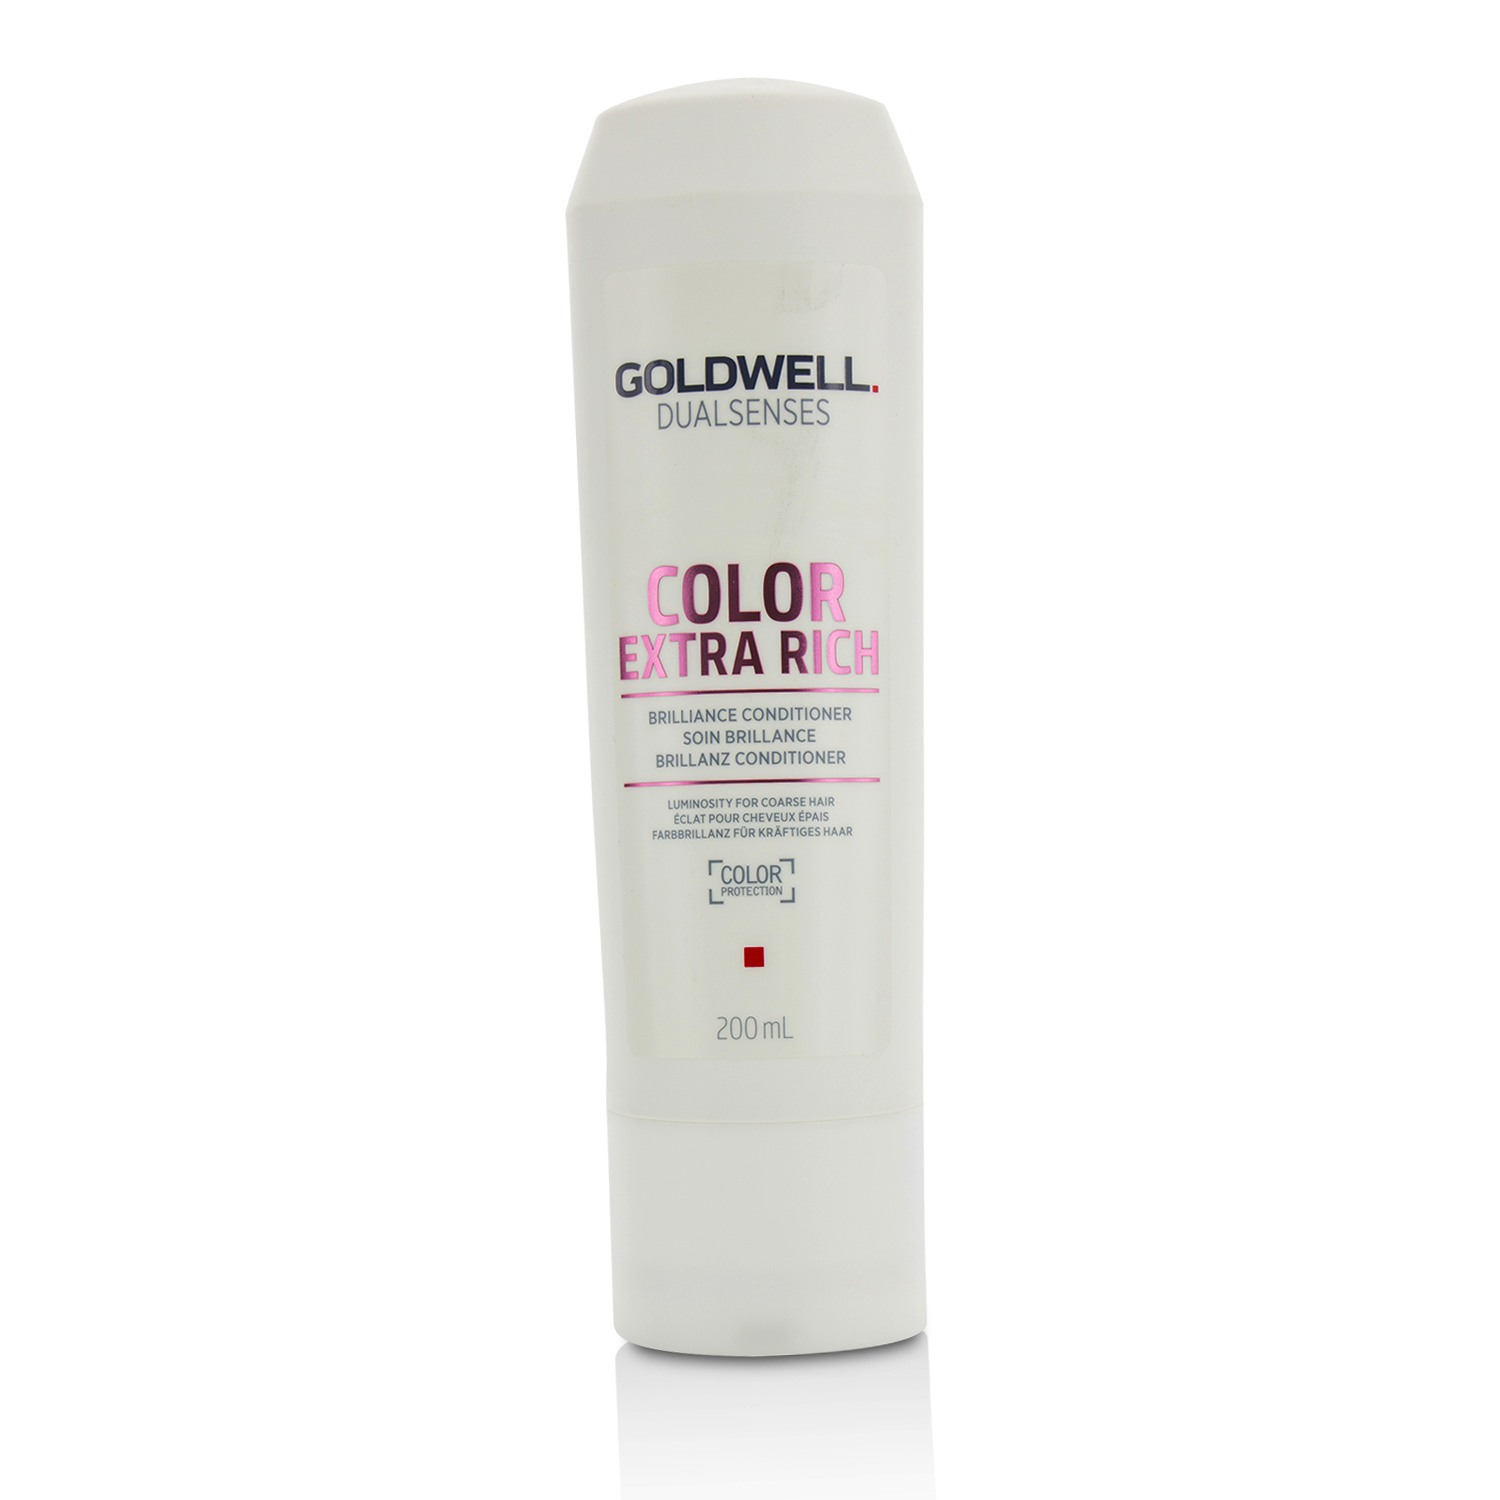 Dual Senses Color Extra Rich Brilliance Conditioner (Luminosity For Coarse Hair) Goldwell Image